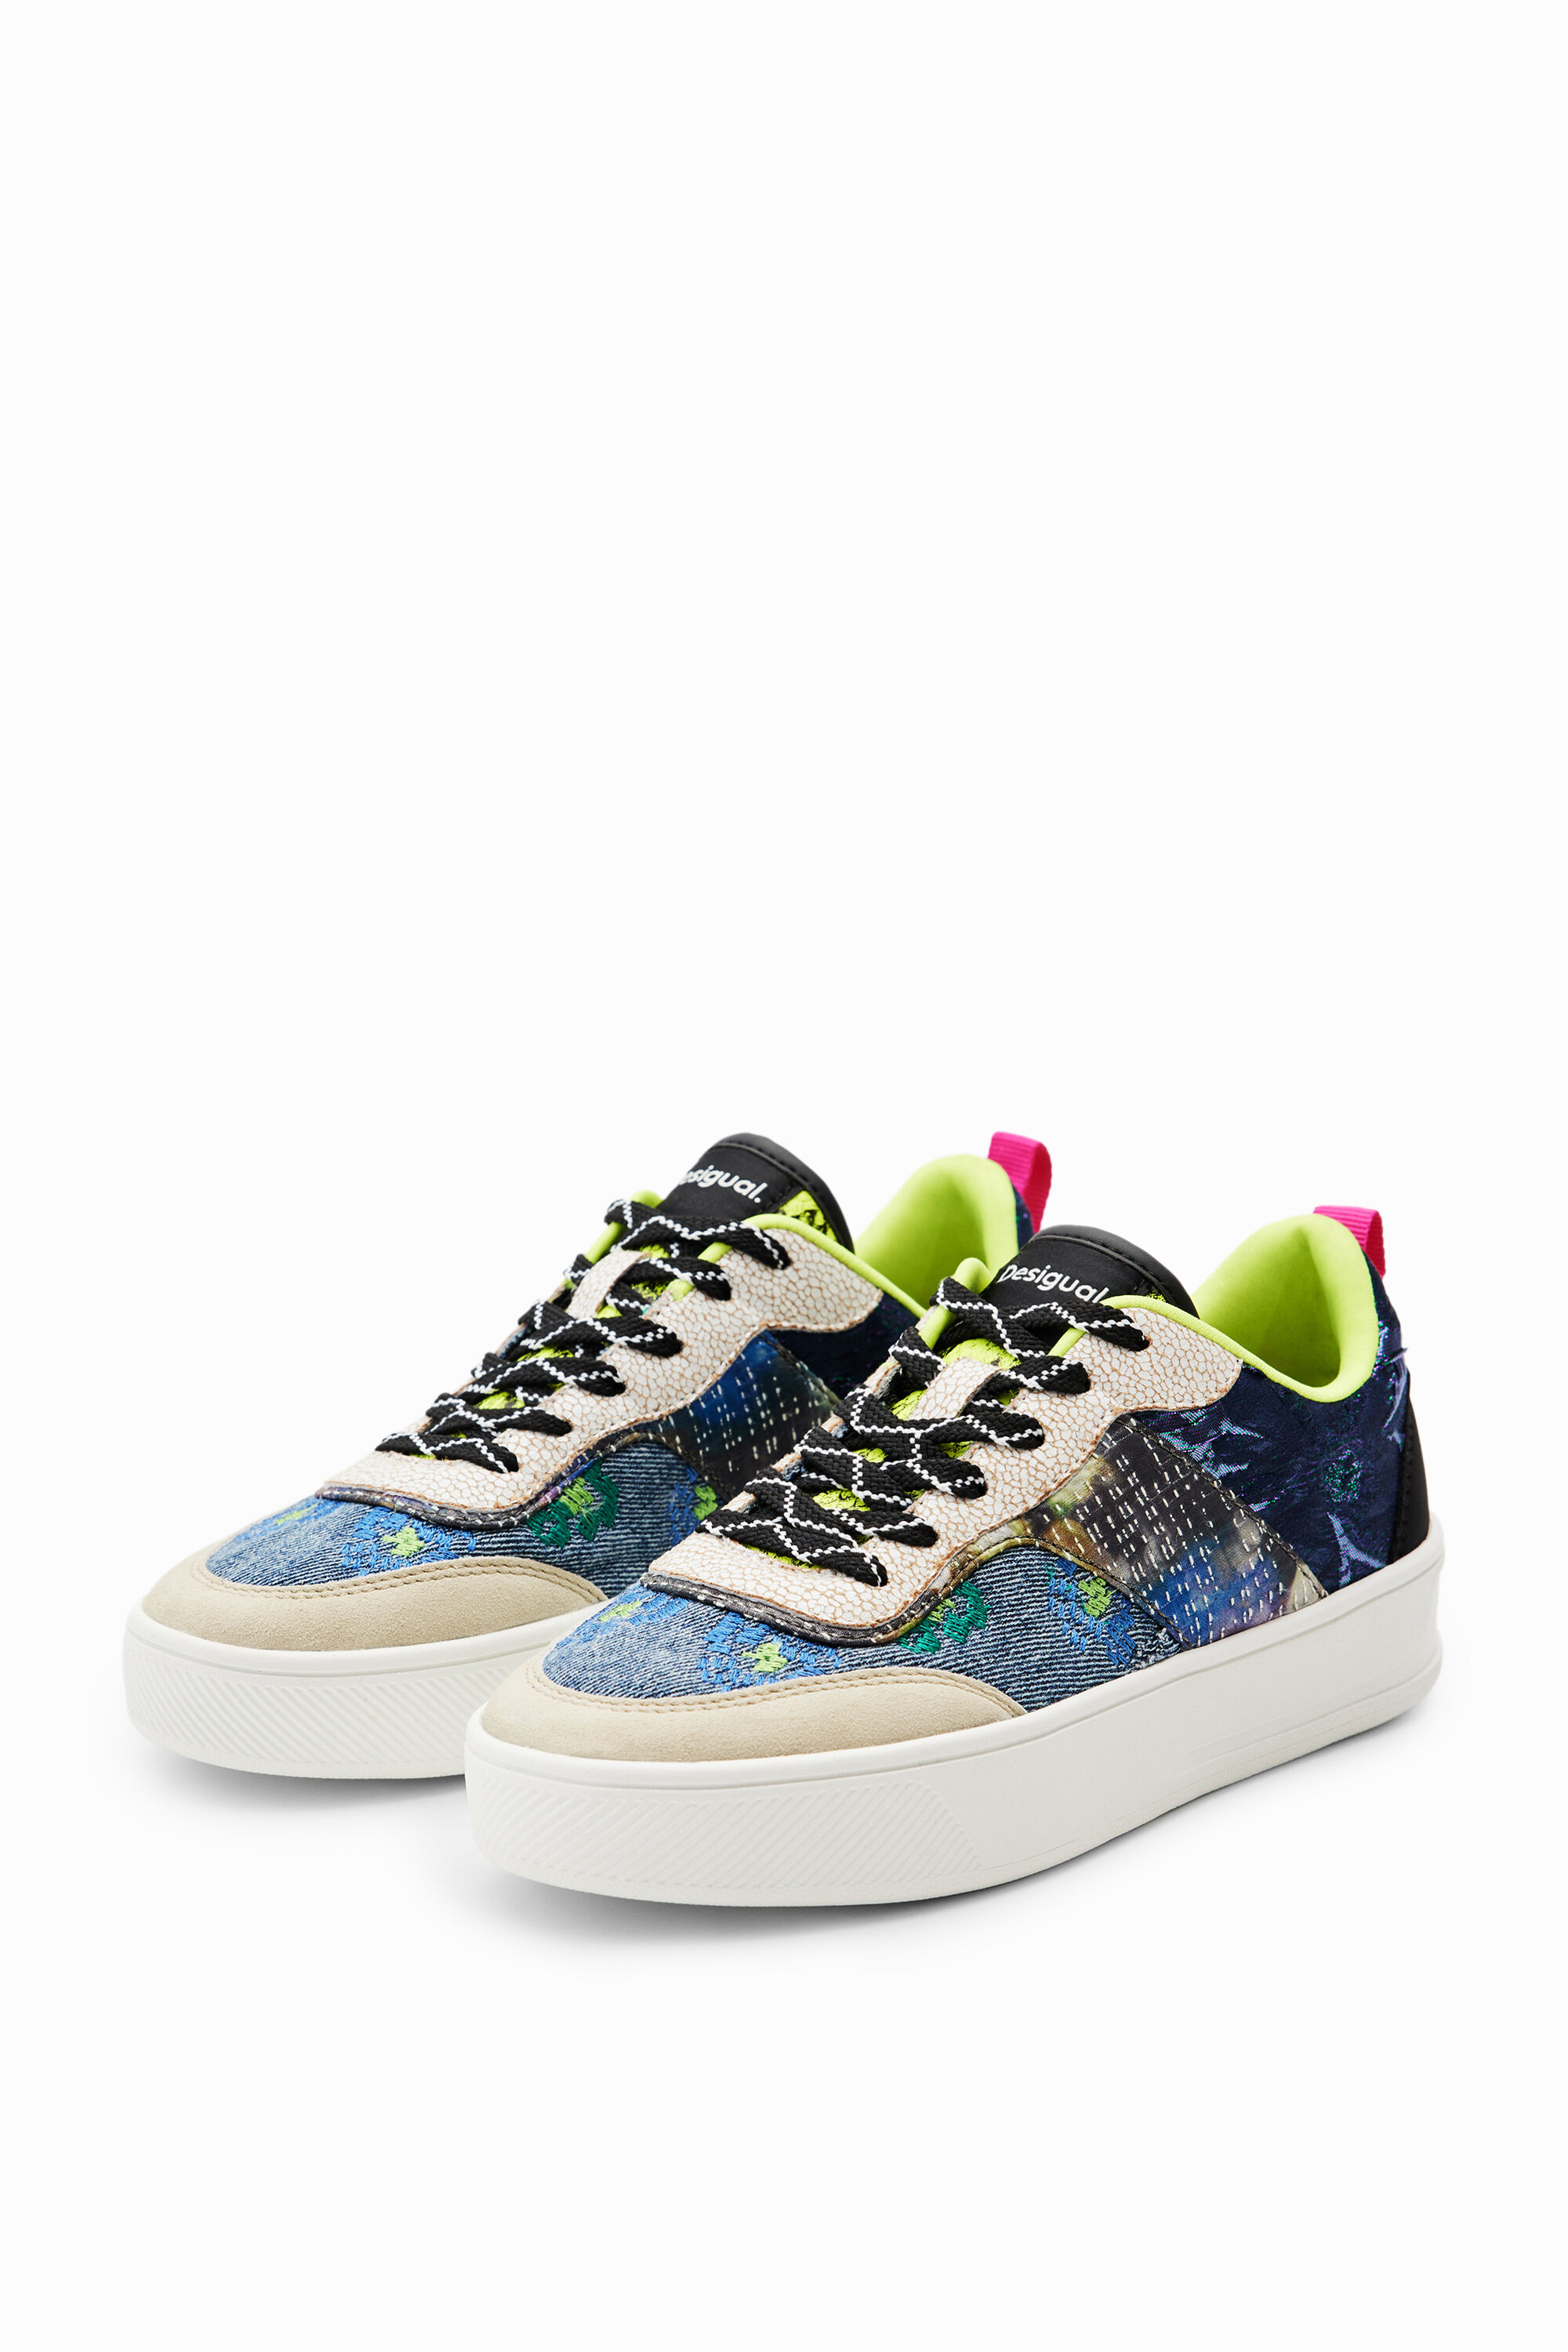 Patchwork platform sneakers - MATERIAL FINISHES - 38